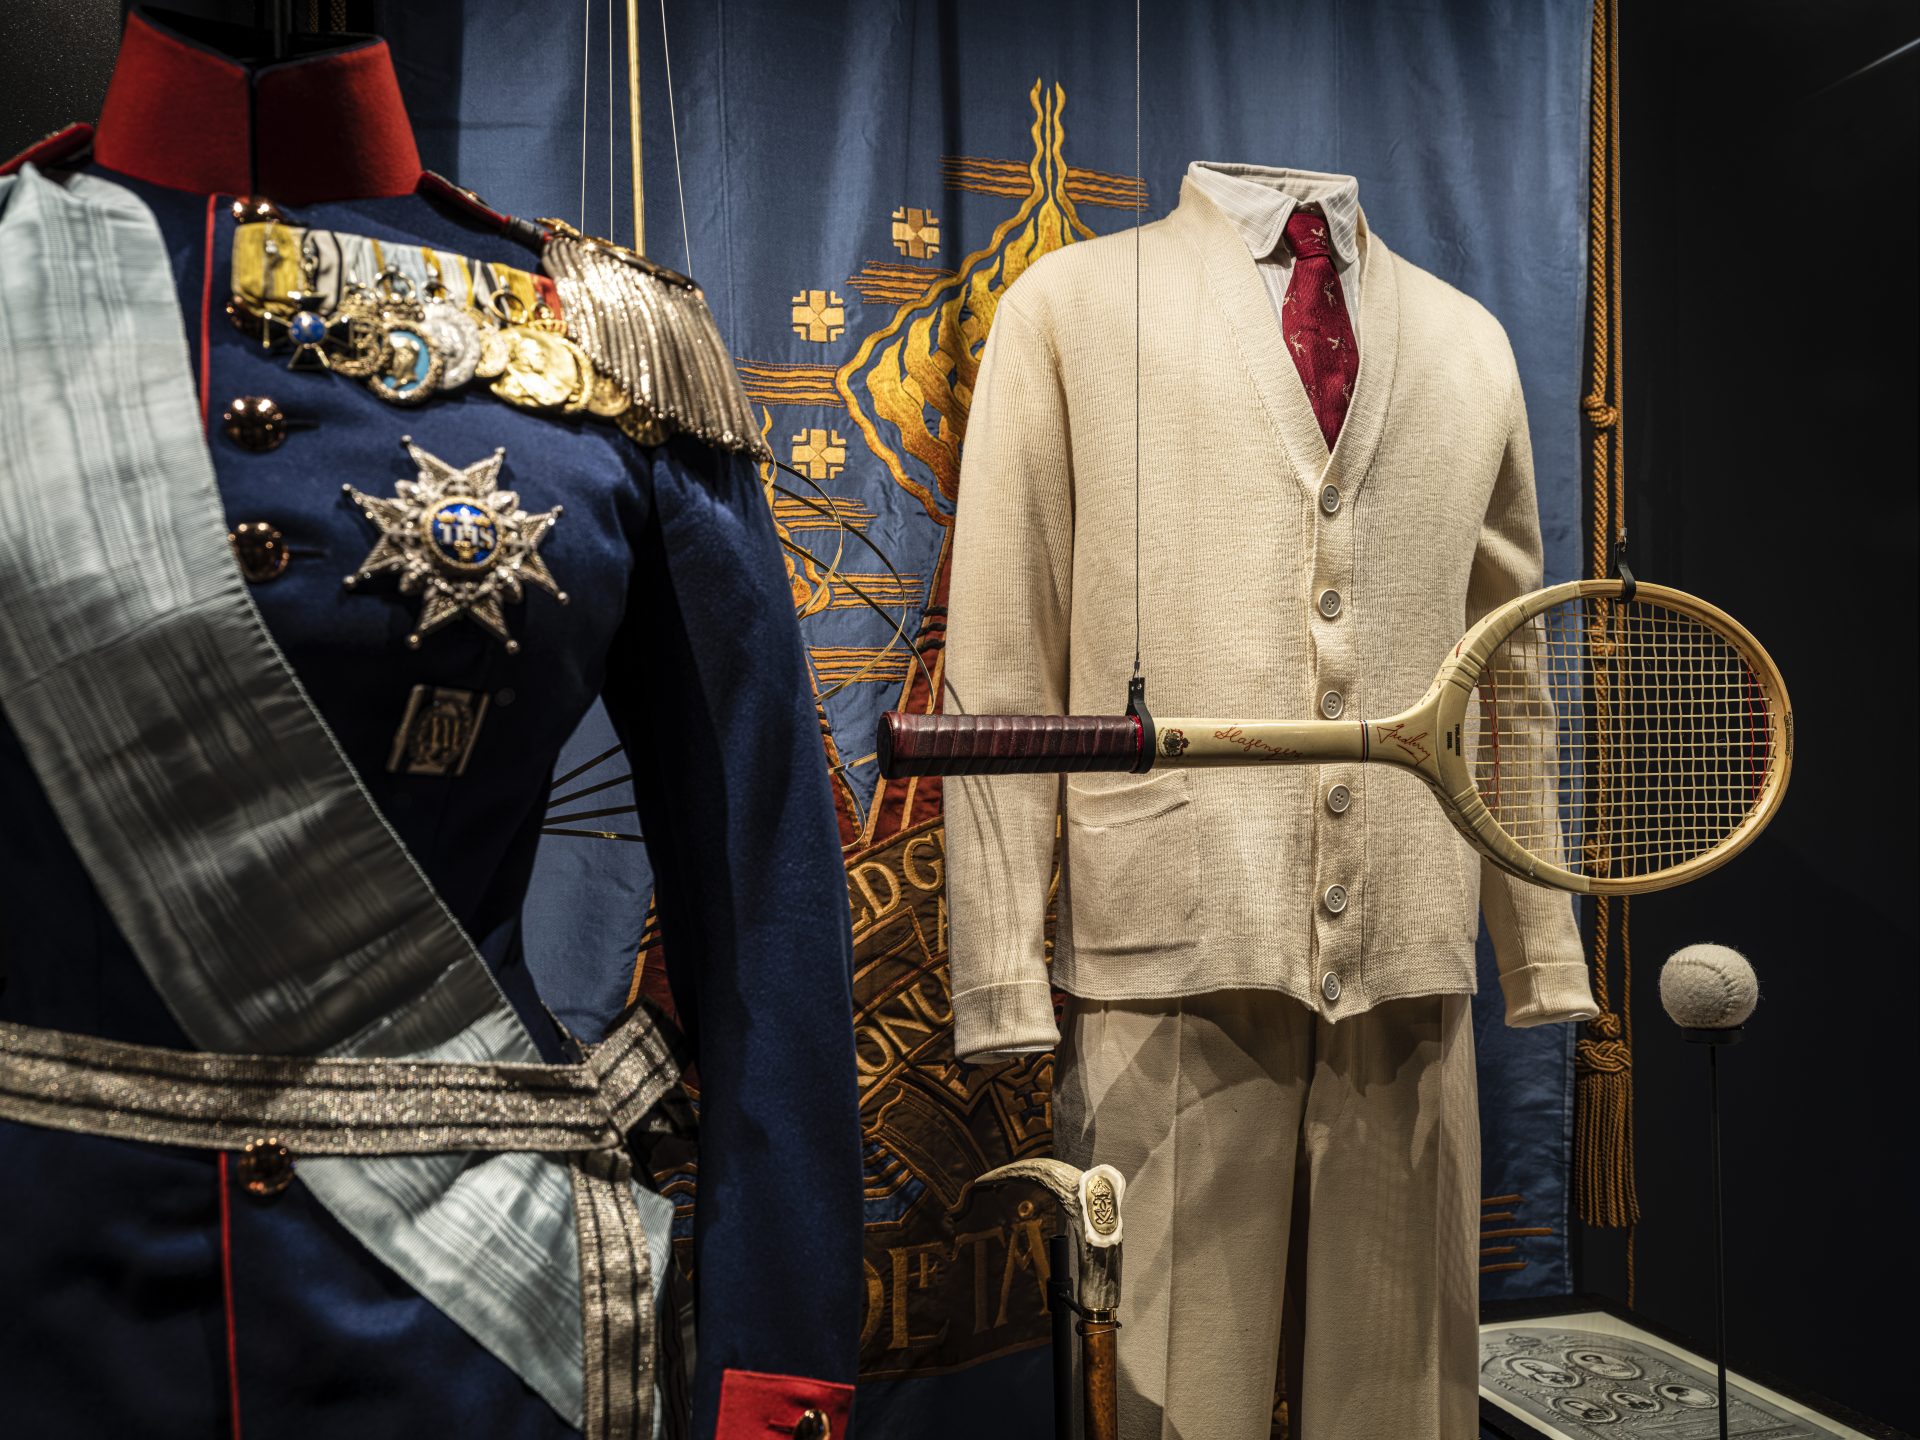  Royal costumes in one of the museum's cases.